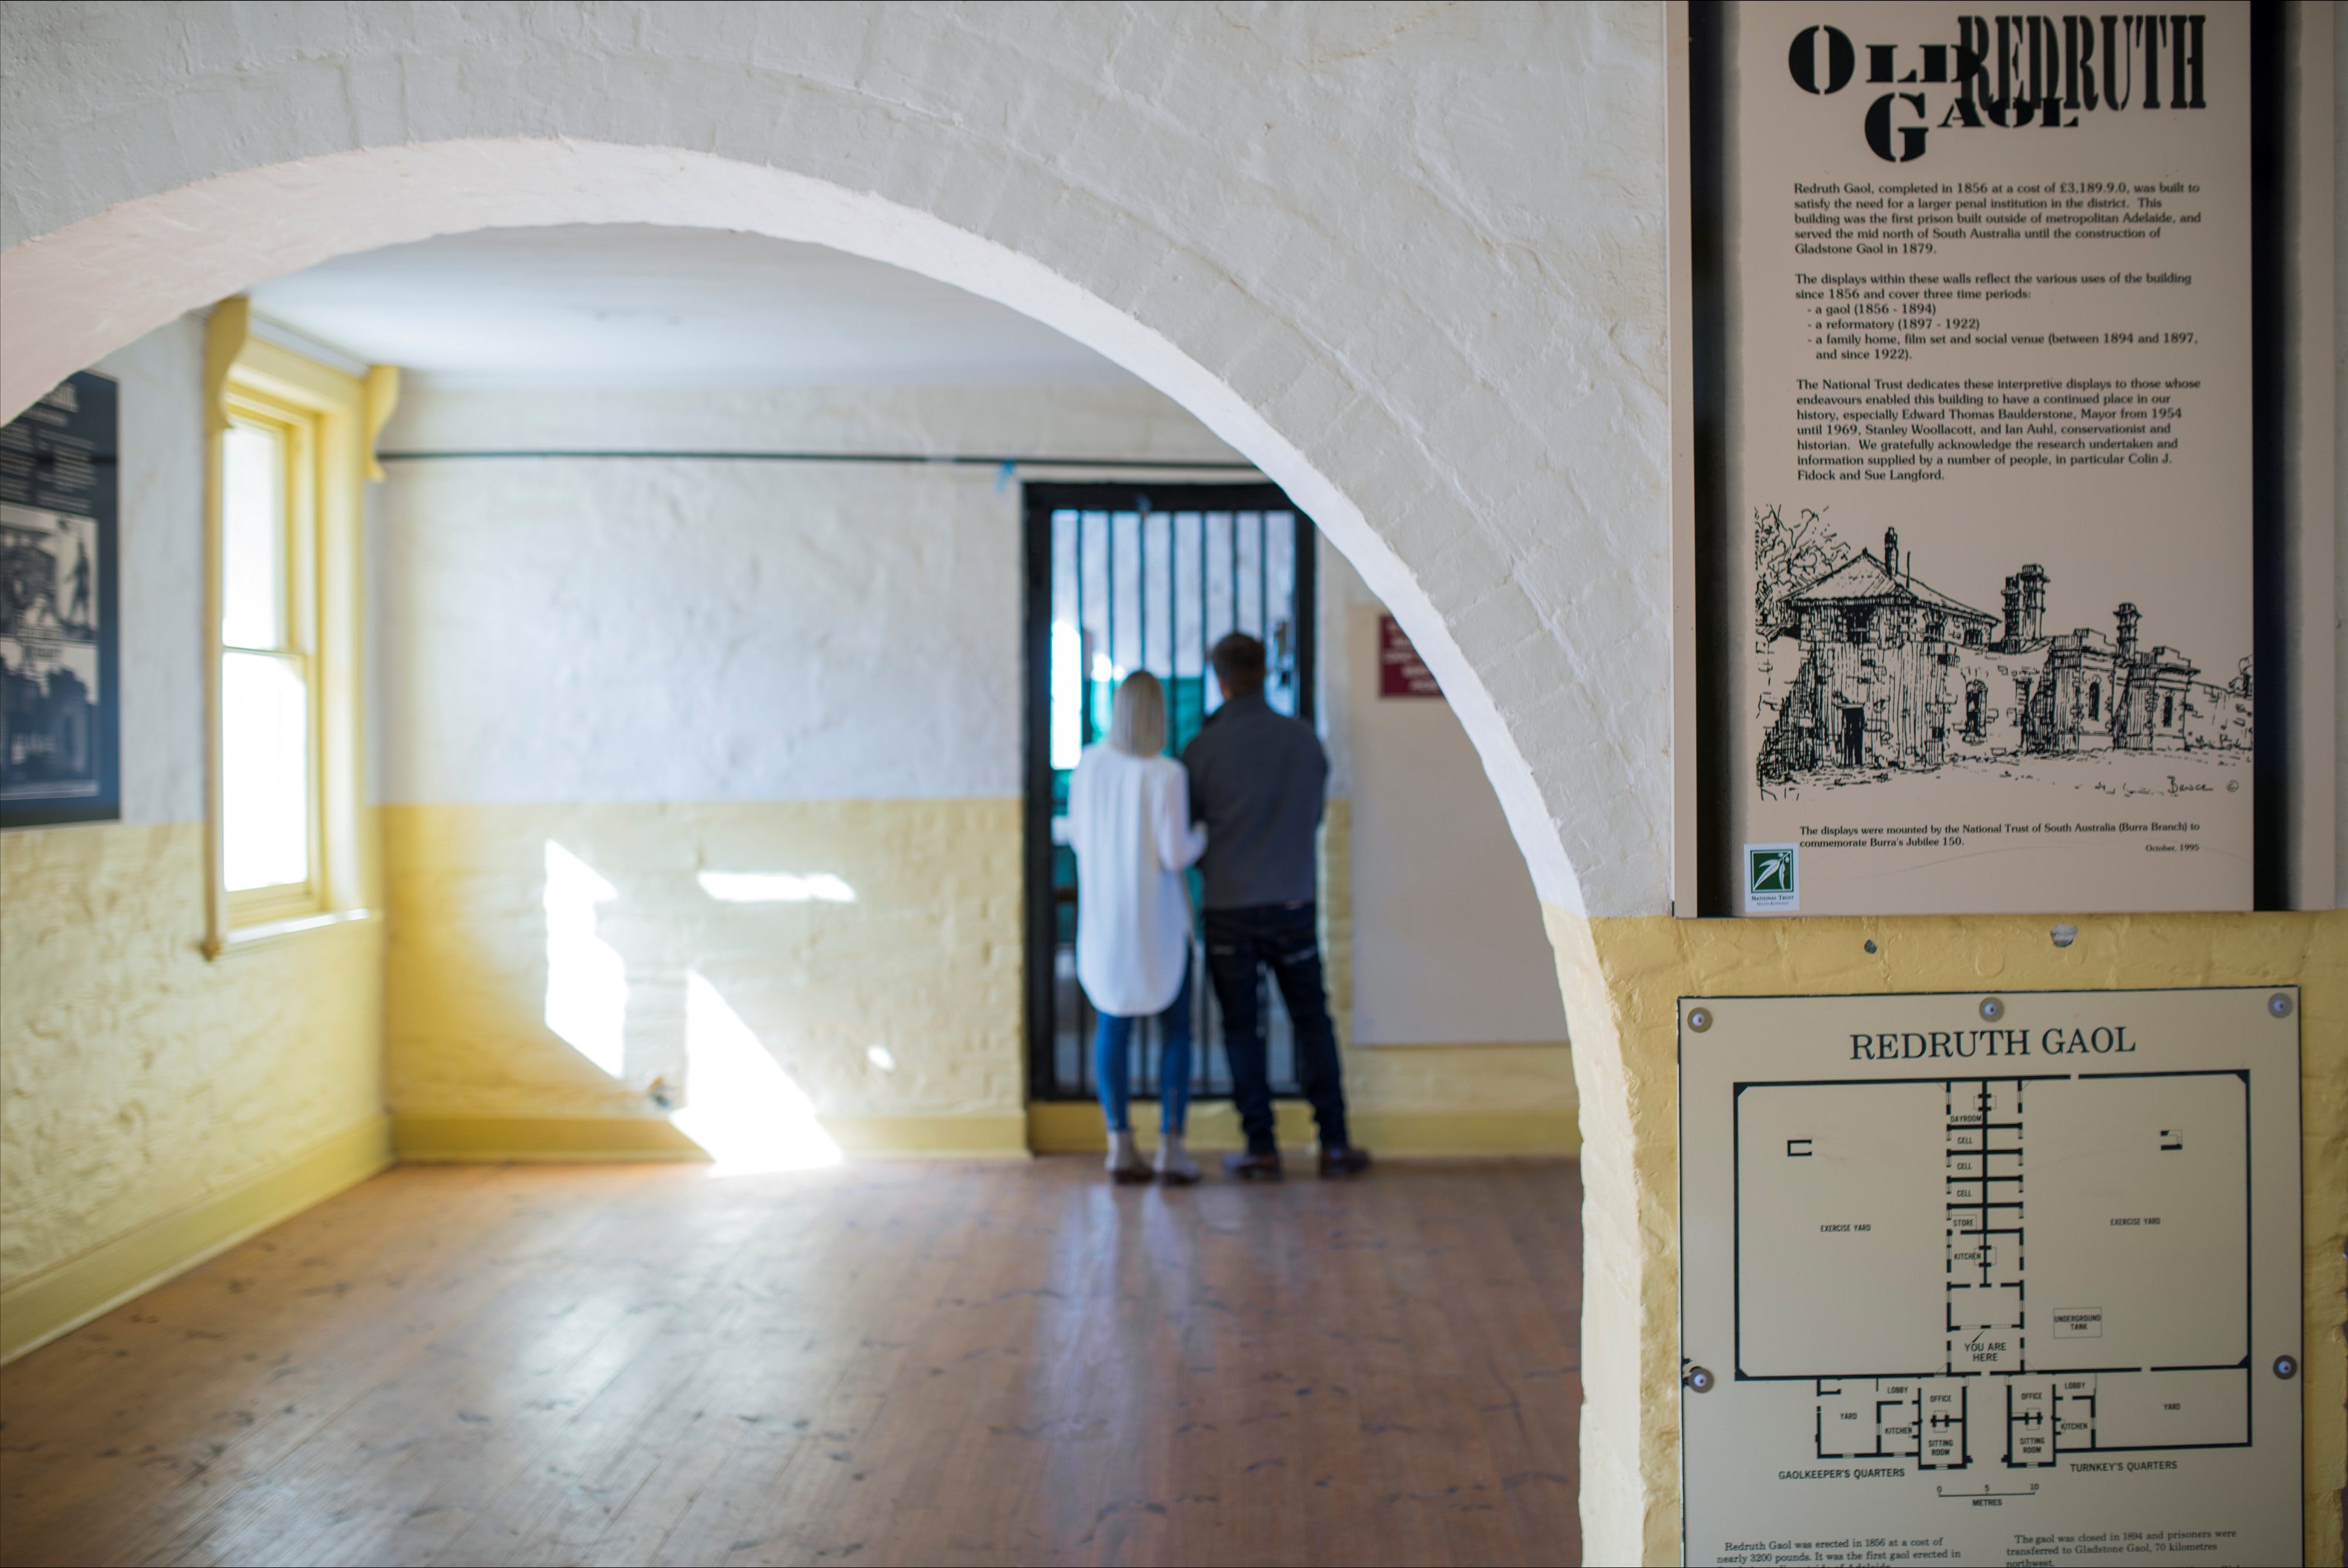 Redruth Gaol - Find Attractions